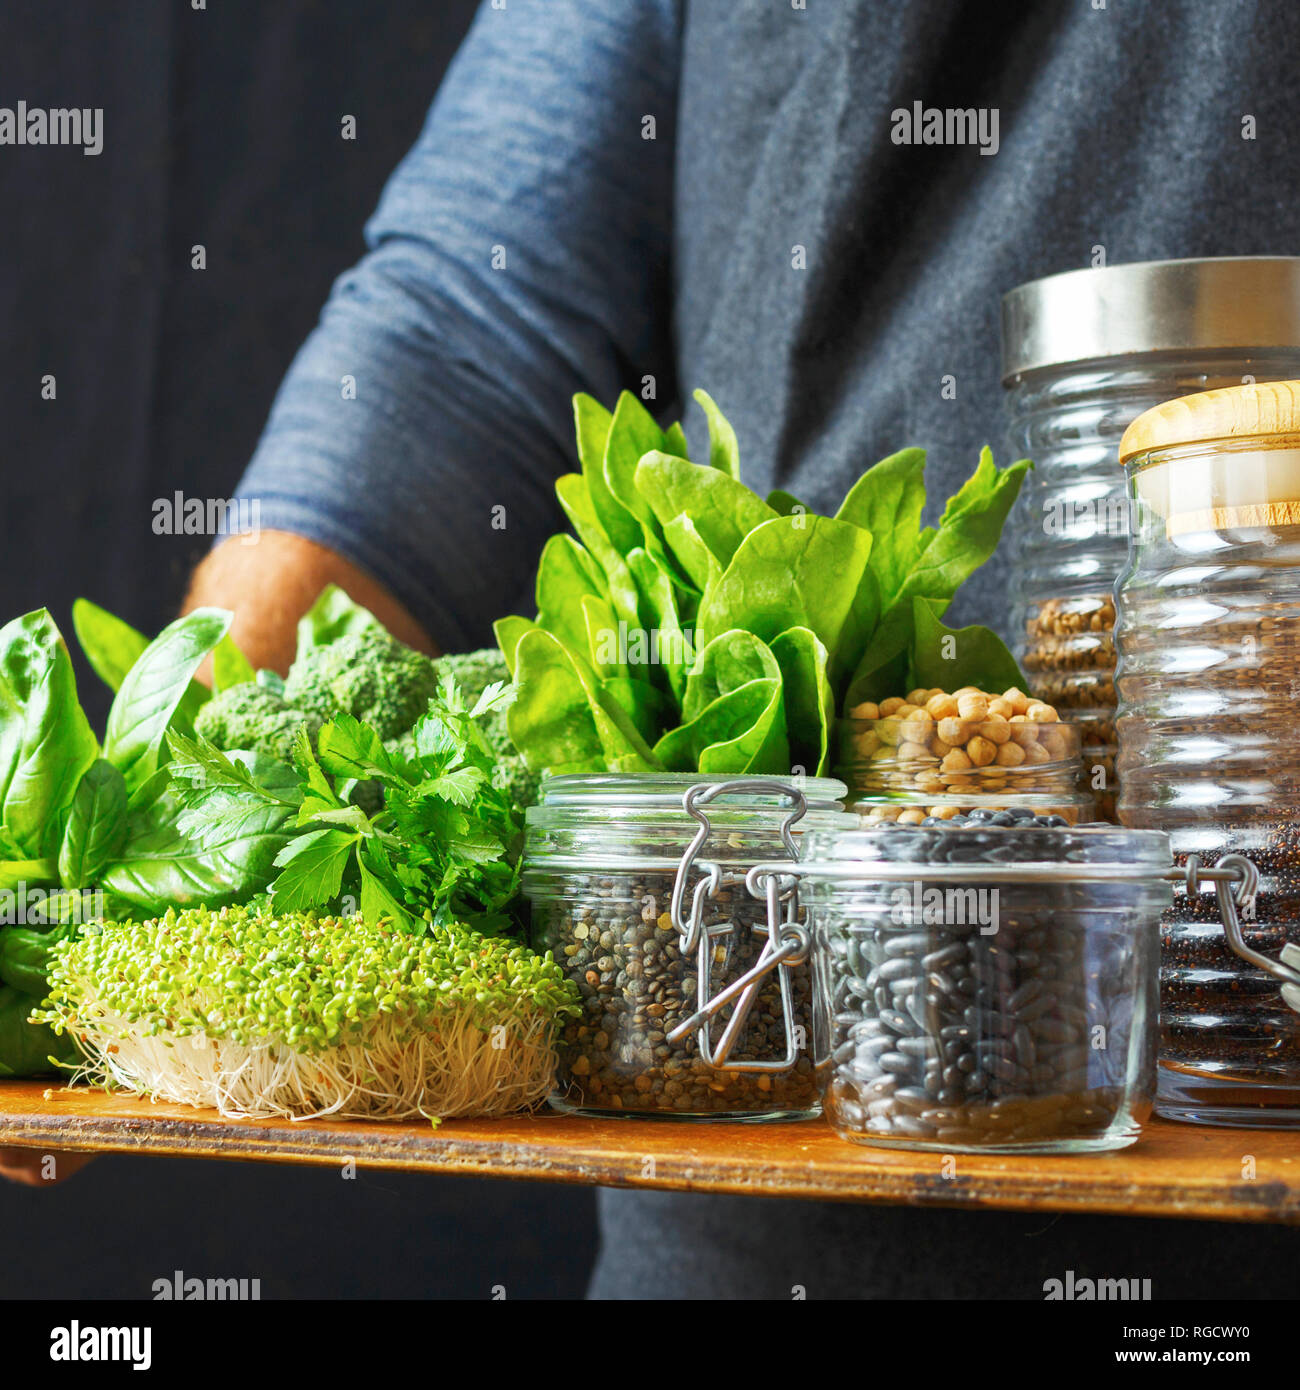 Healthy food, source of protein for vegetarians: vegetable greens, groats, seeds in glass jars in hands man Stock Photo